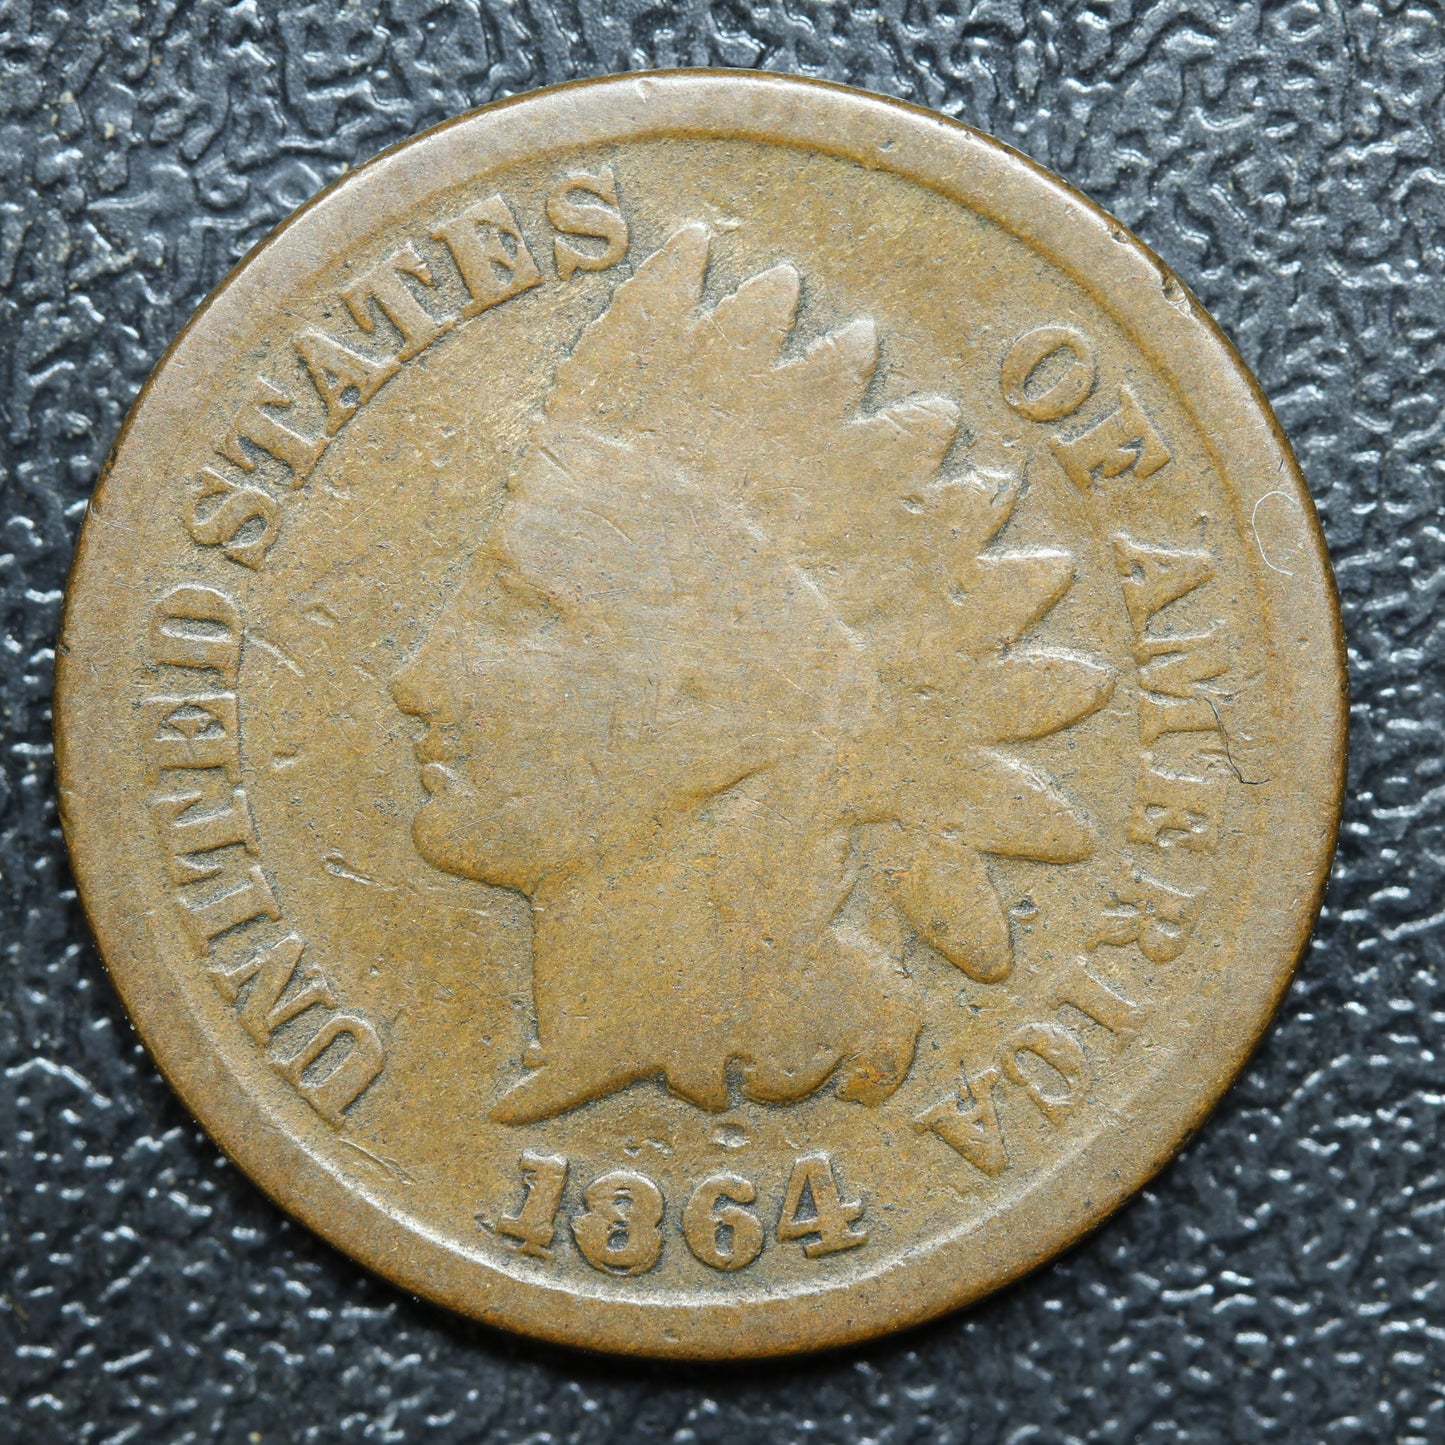 1864 "L" Indian Head Cent, L Not Visible Snow-1! Pointed Bust RPD